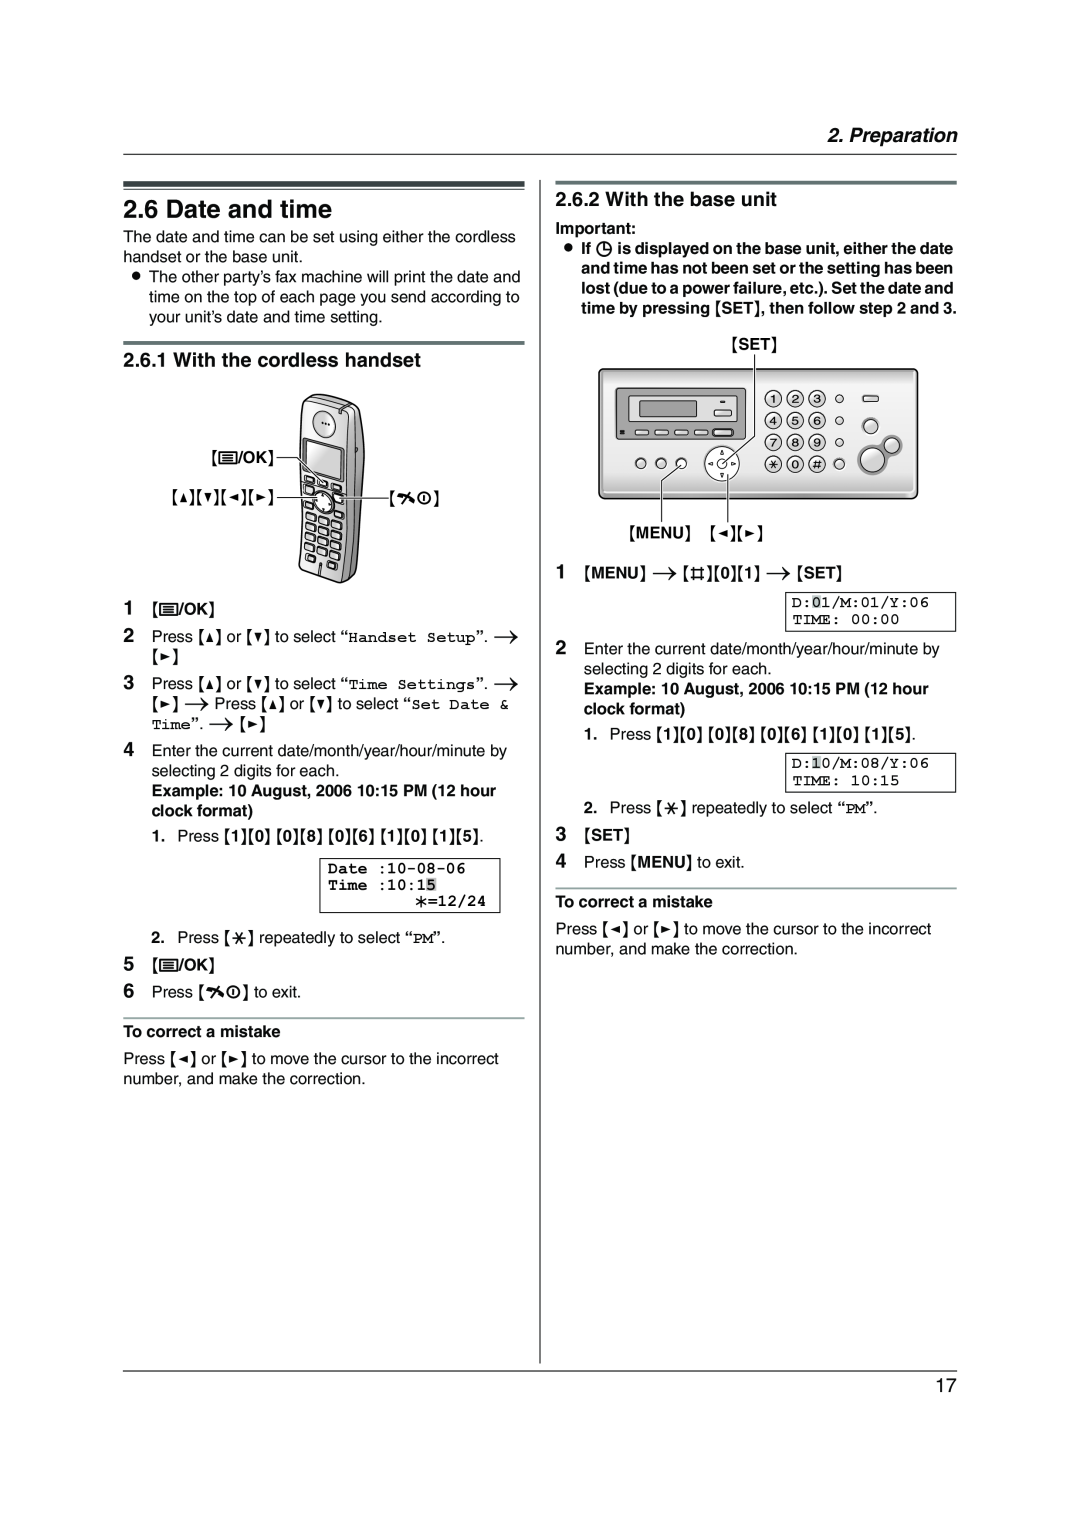 Panasonic KX-FC228HK Date and time, With the cordless handset, With the base unit, Preparation, Date Time =12/24 